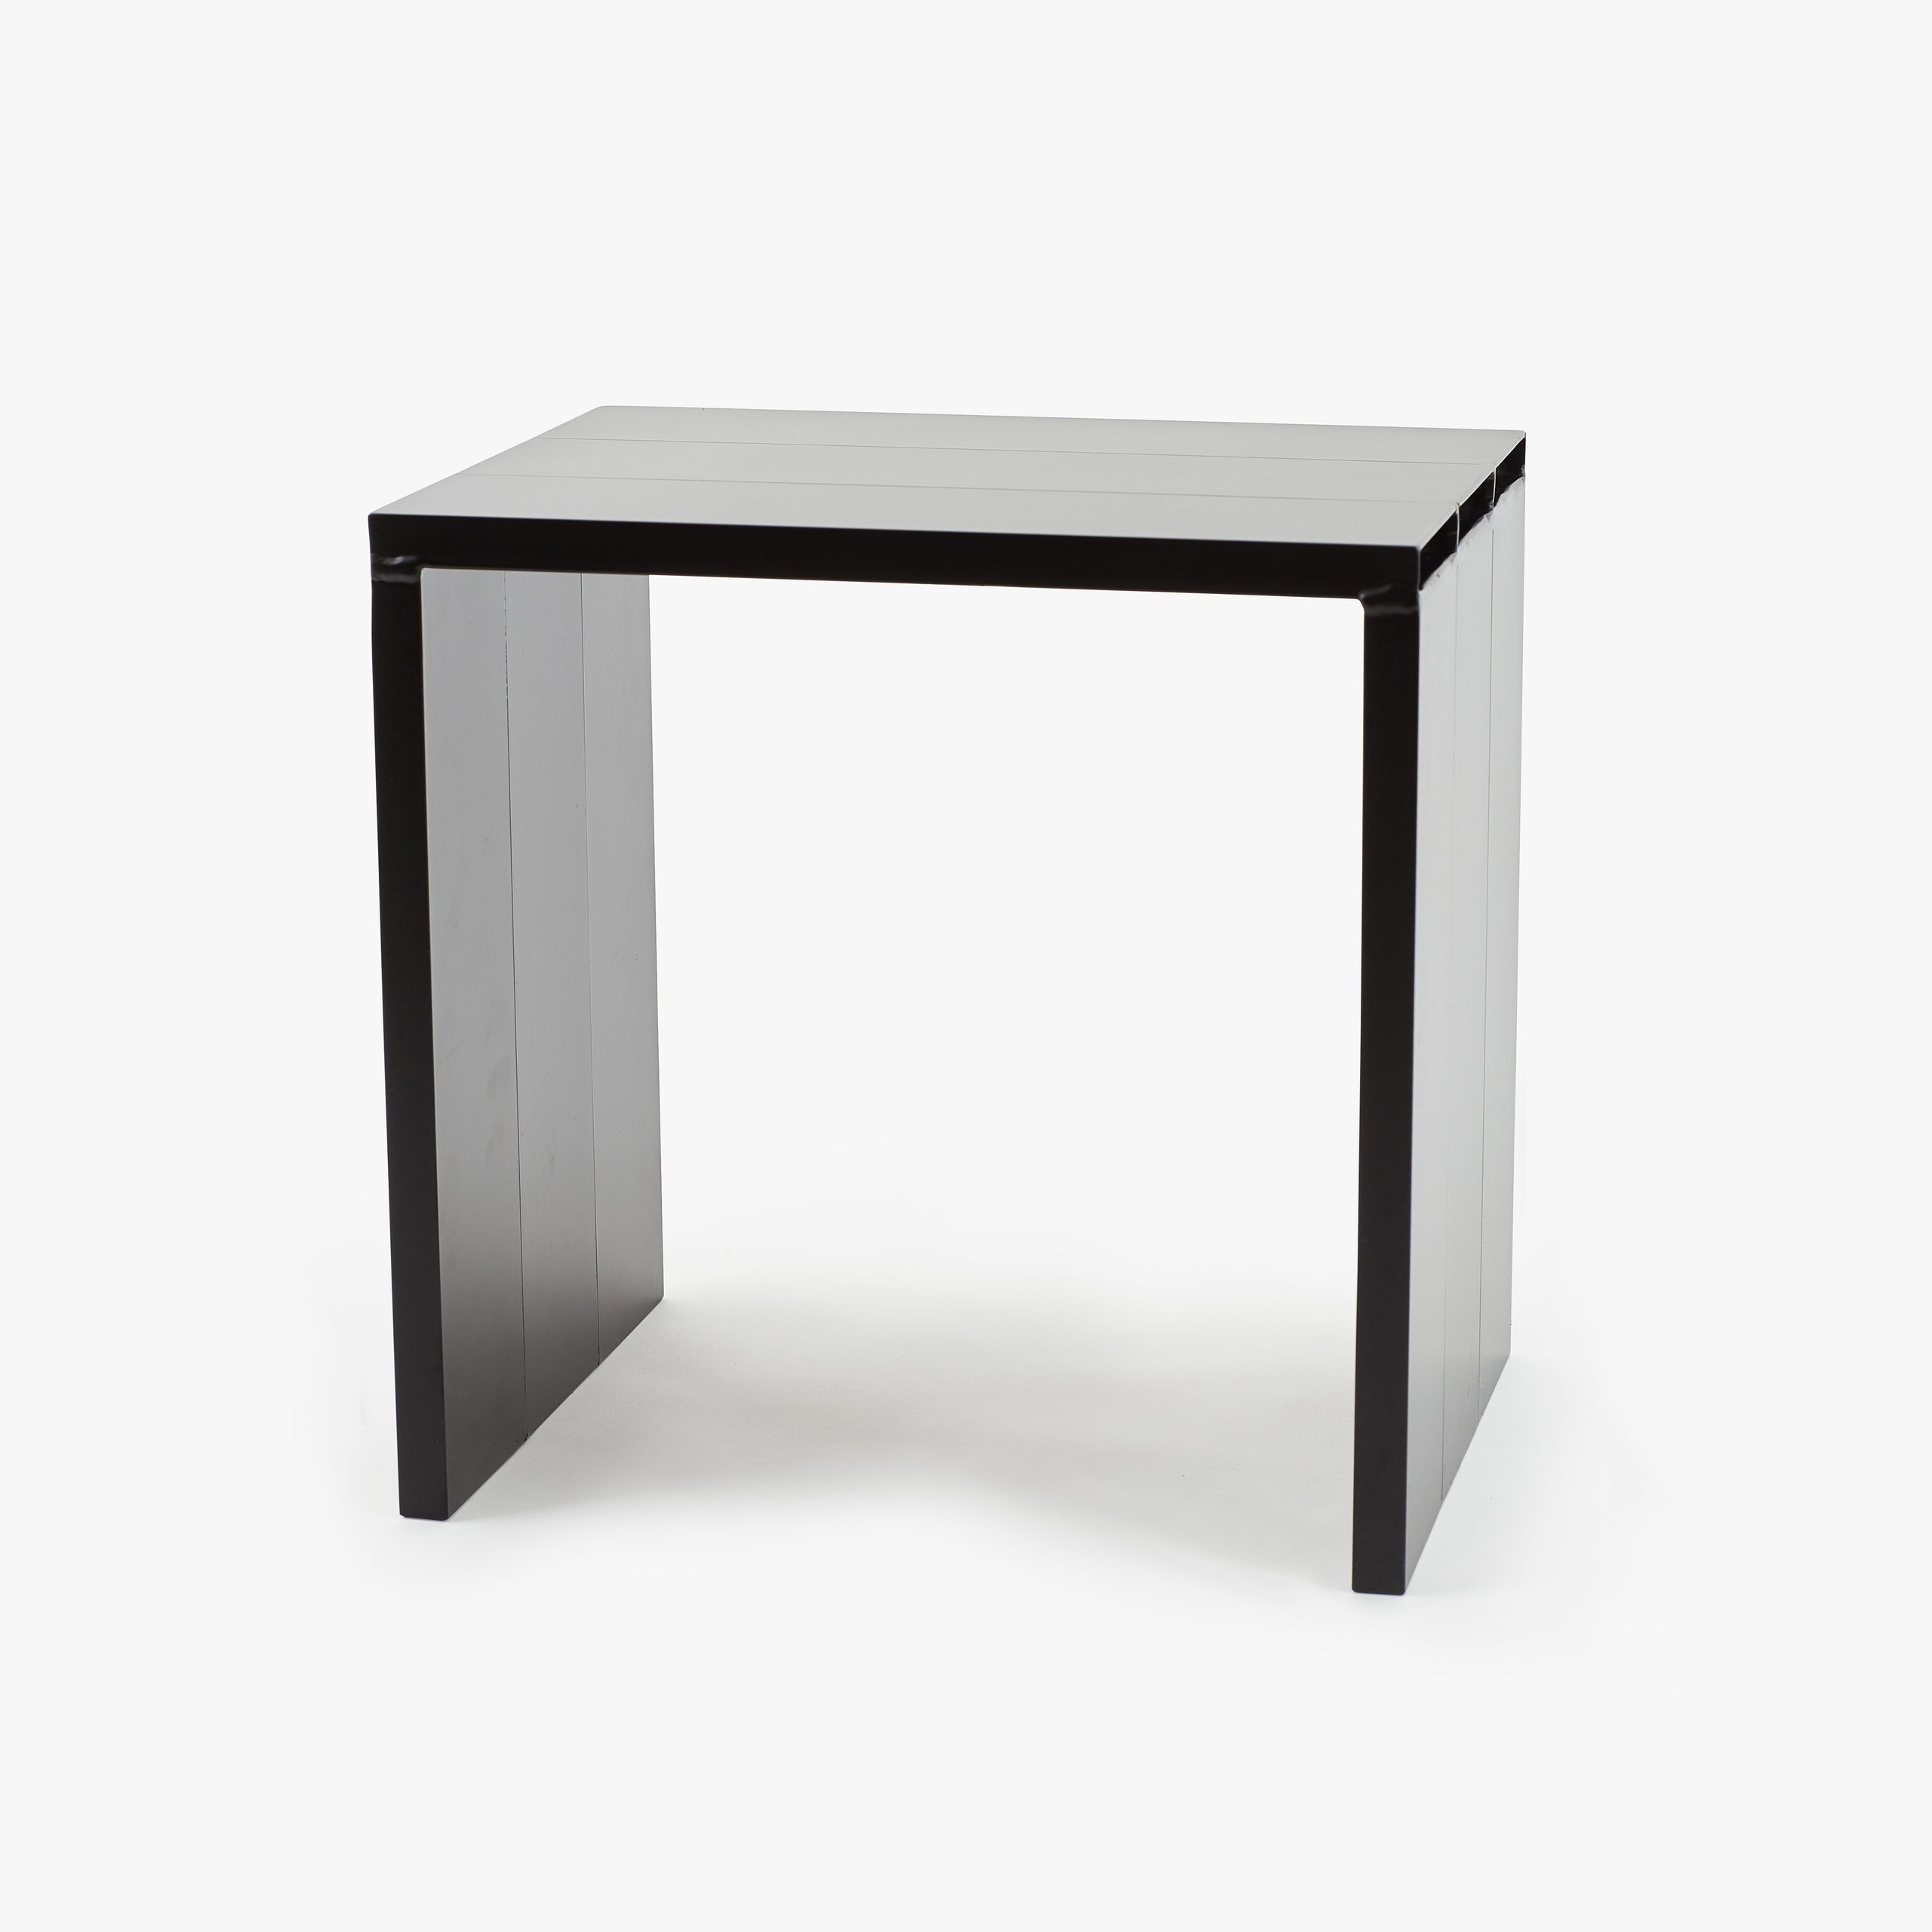 Aluminum side table by Mikel Peruch